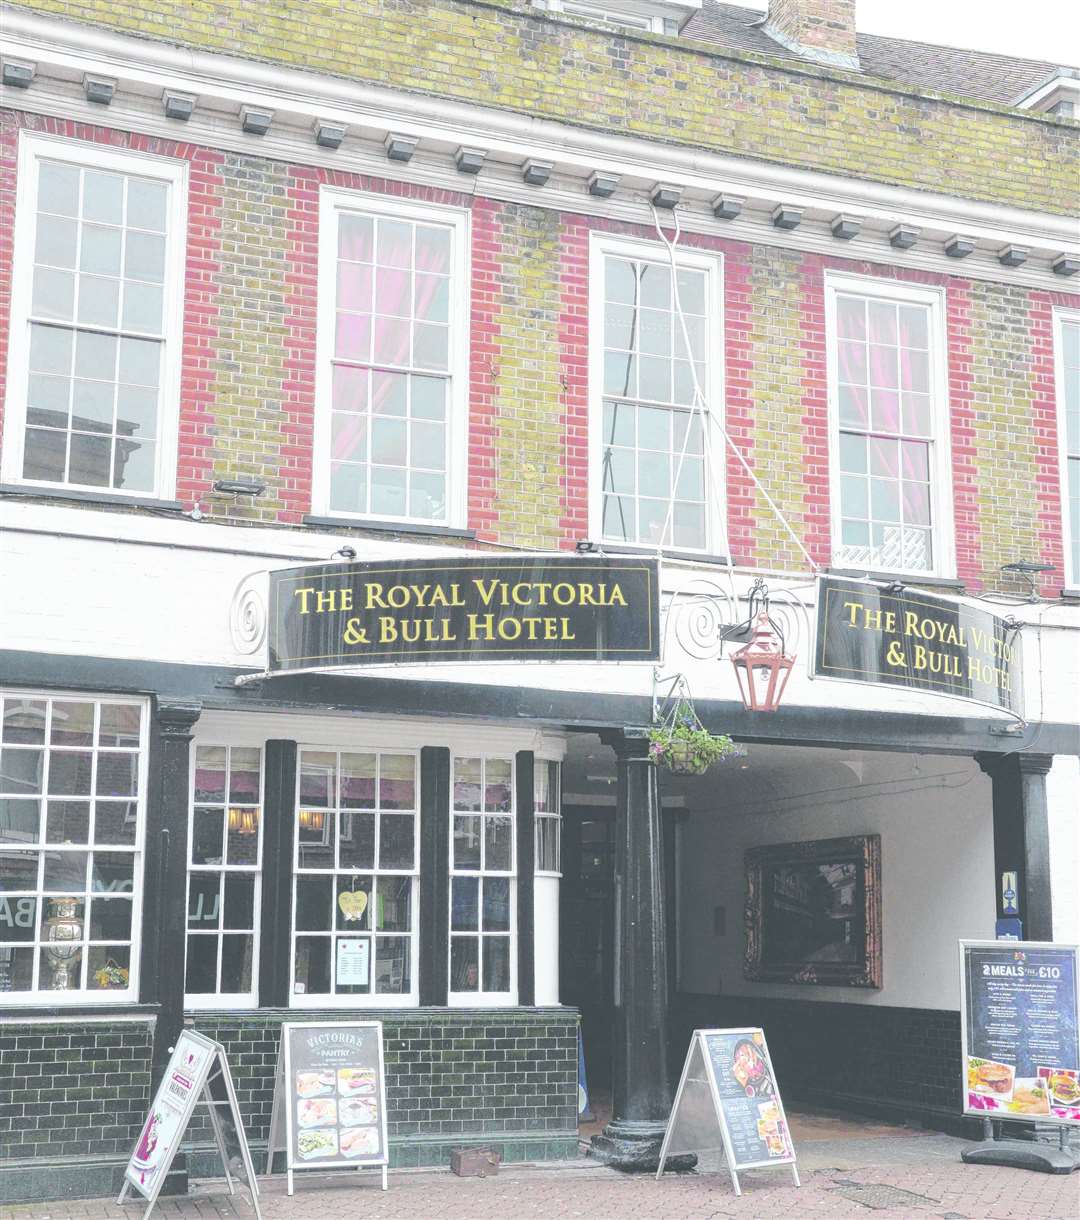 The Royal Victoria and Bull Hotel in Dartford High Street today, which still has the central opening originally built for stagecoaches